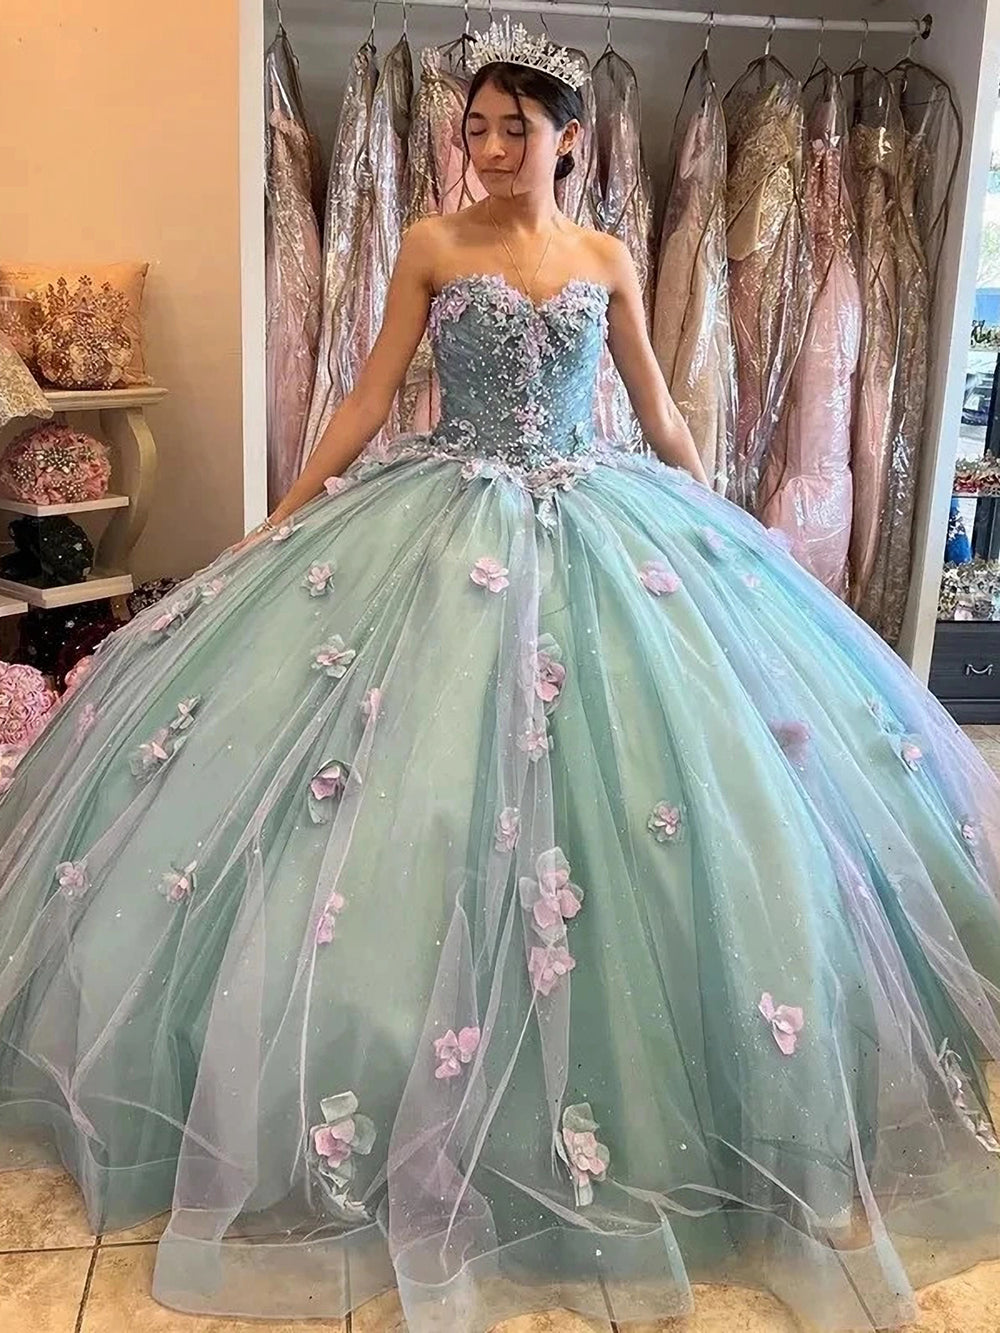 Sweetheart Ball Gown Quinceanera Dresses with Big Bow Appliques Beaded Tulle Princess 15 Year Old Birthday Formal Party Dress